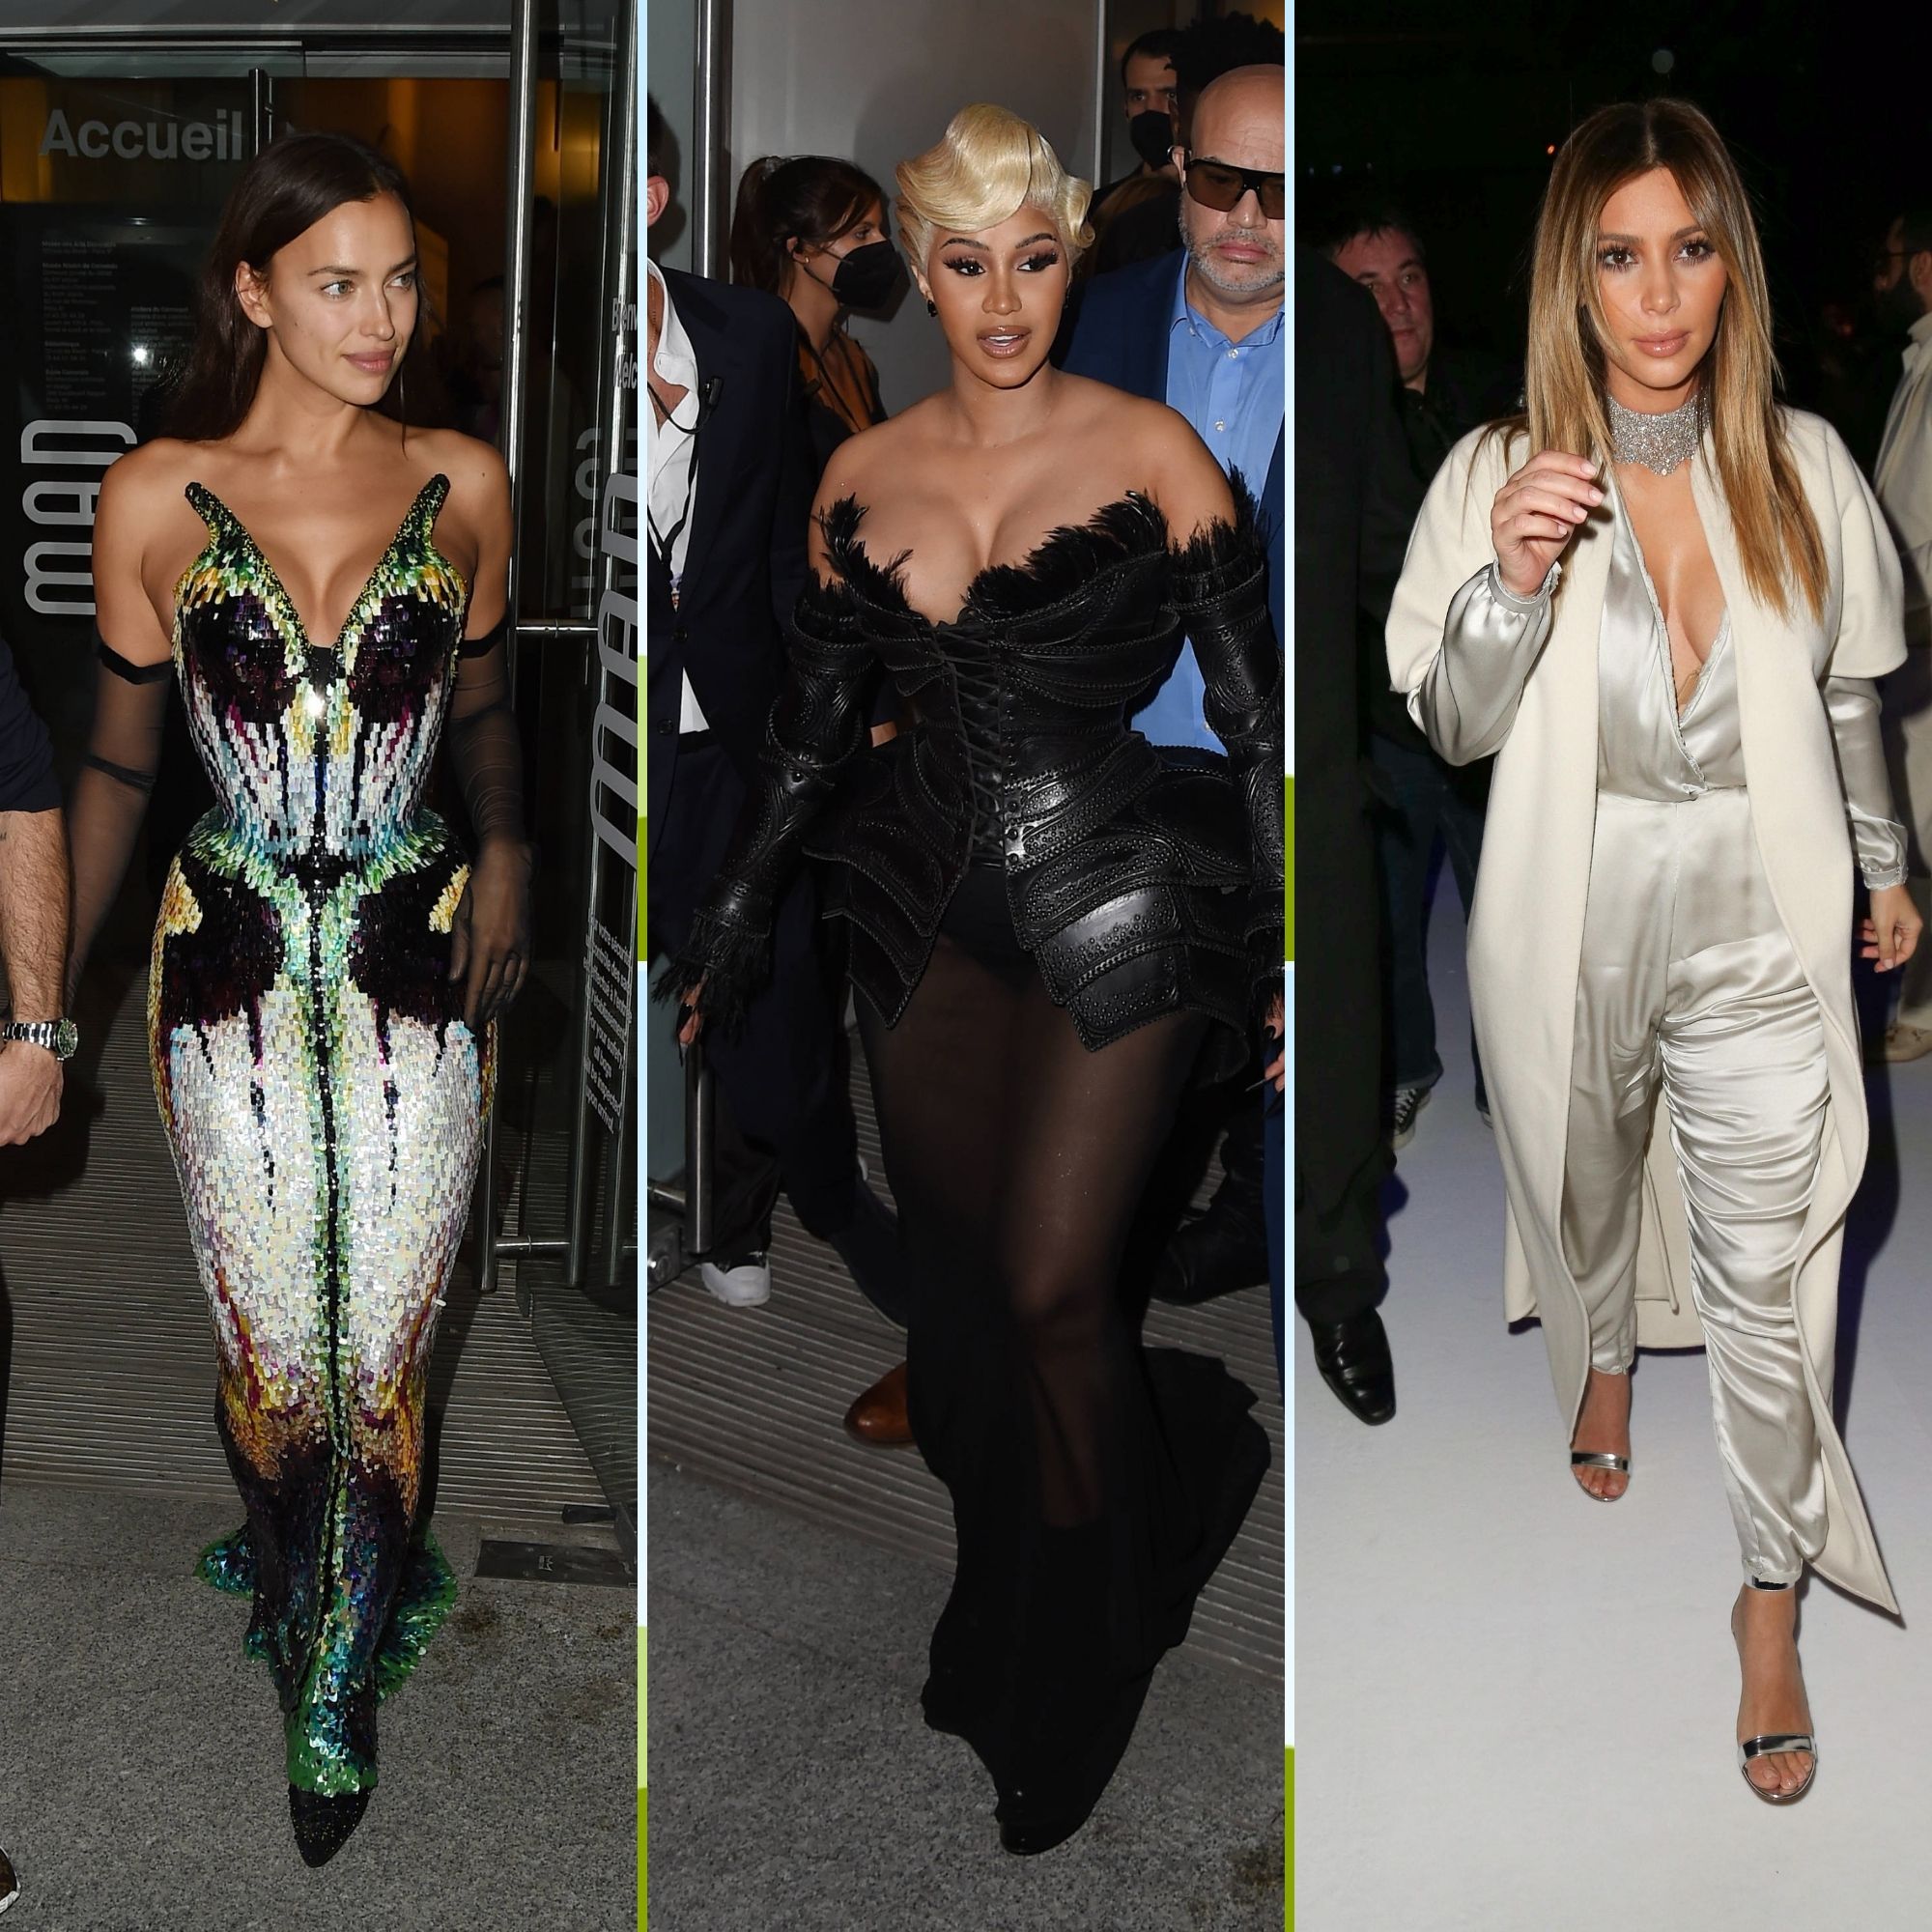 Stars in Plunging Outfits at Paris Fashion Week: Photos